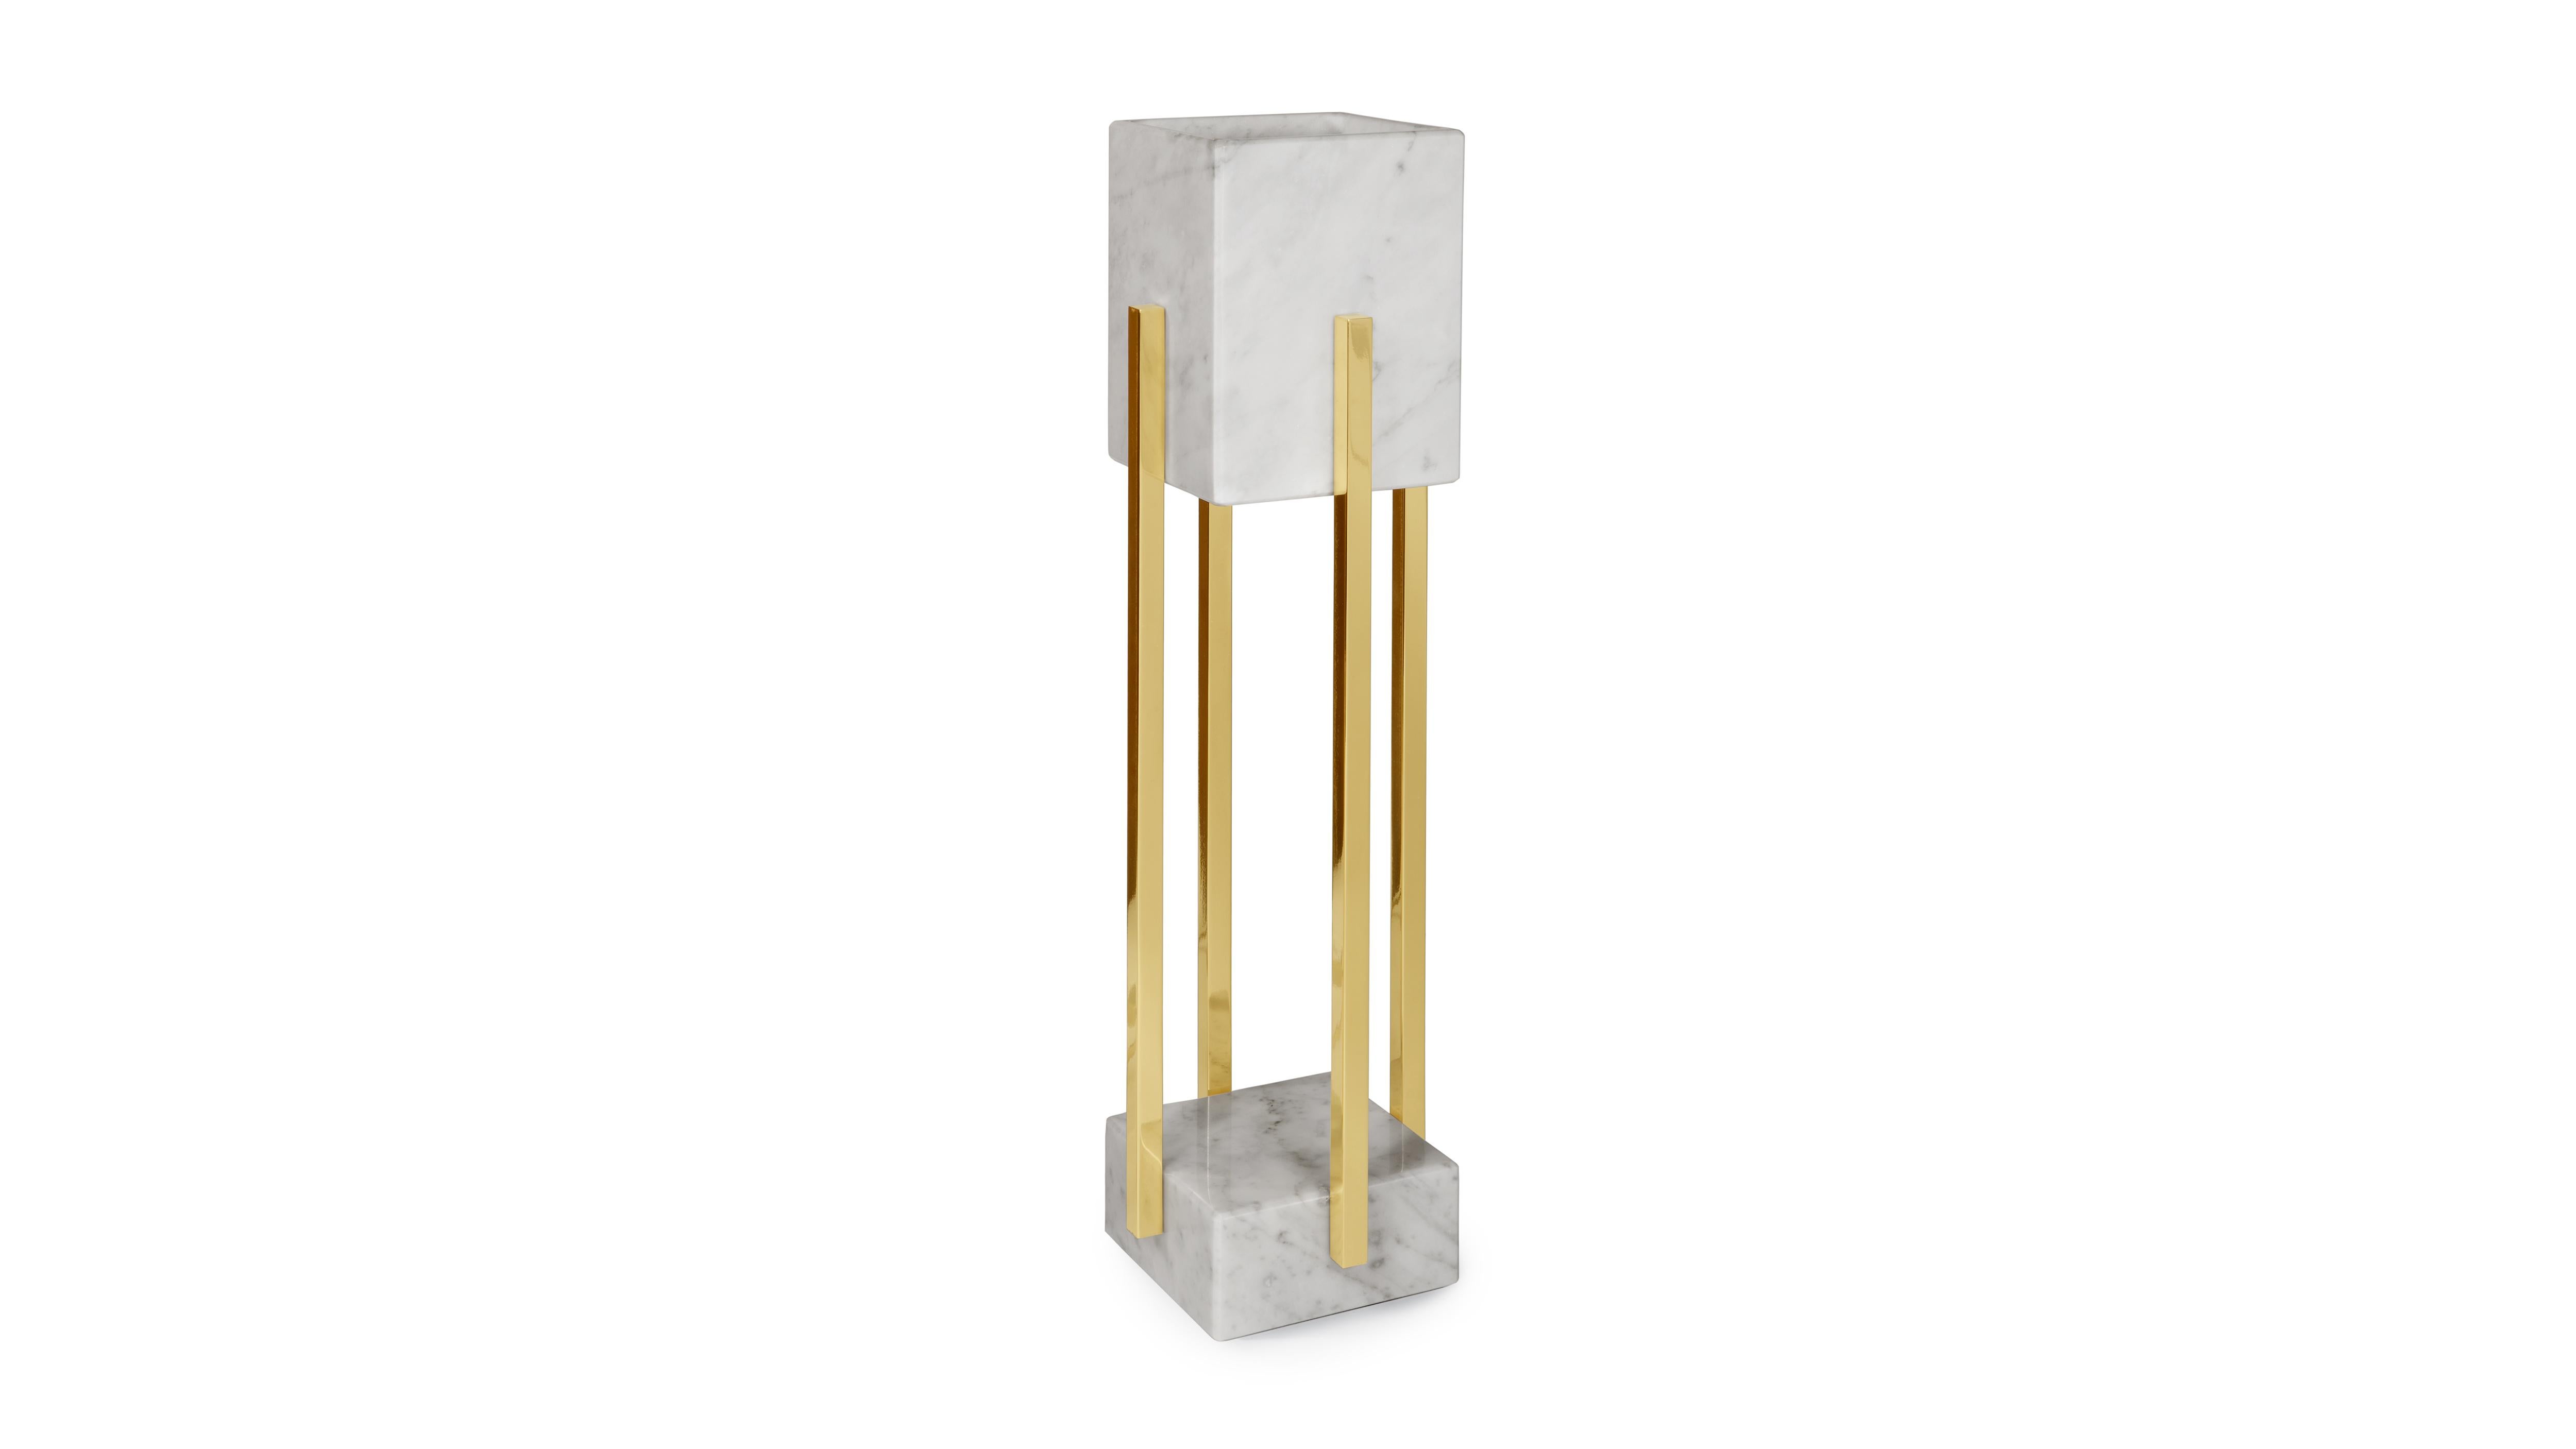 Block form Carrara marble shade and base wall scone with polished brass details. Handcrafted. Various marble and brass or steel finishes are also available.